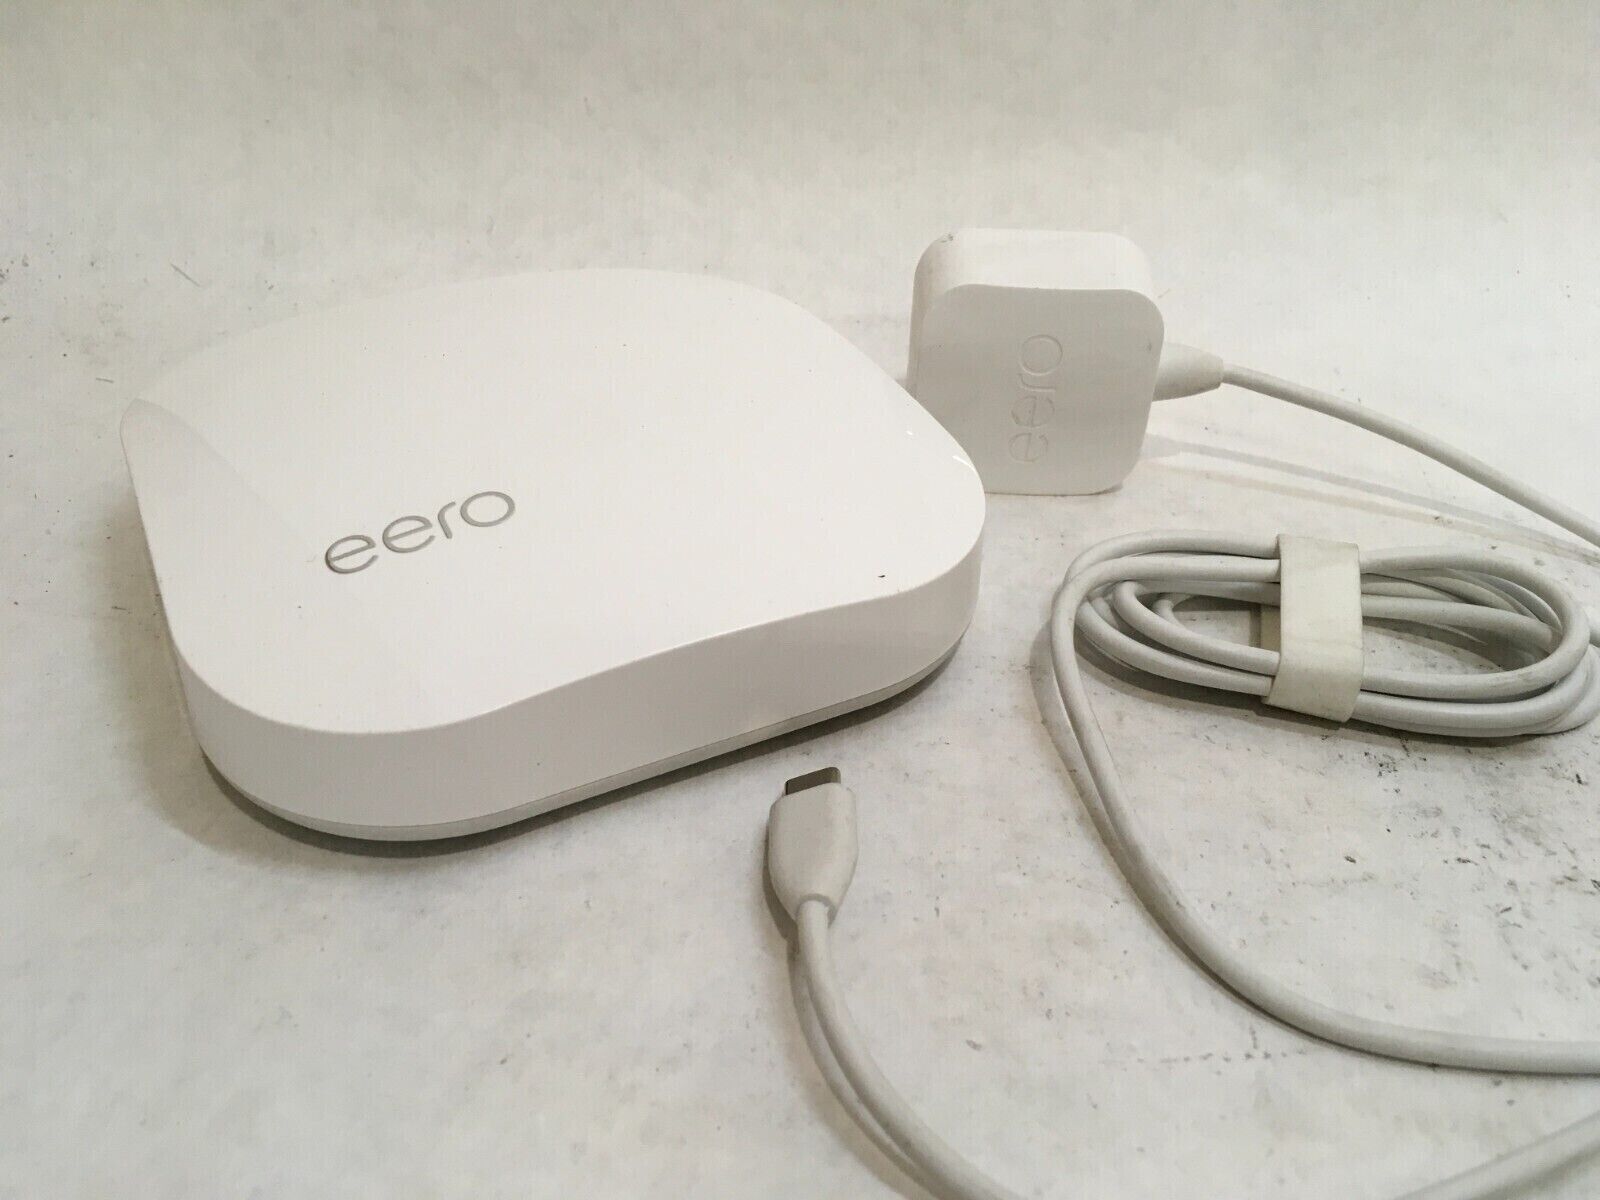 Eero Pro B010001 2nd Generation Gen AC Tri-Band Mesh Router White w/ Power Cable